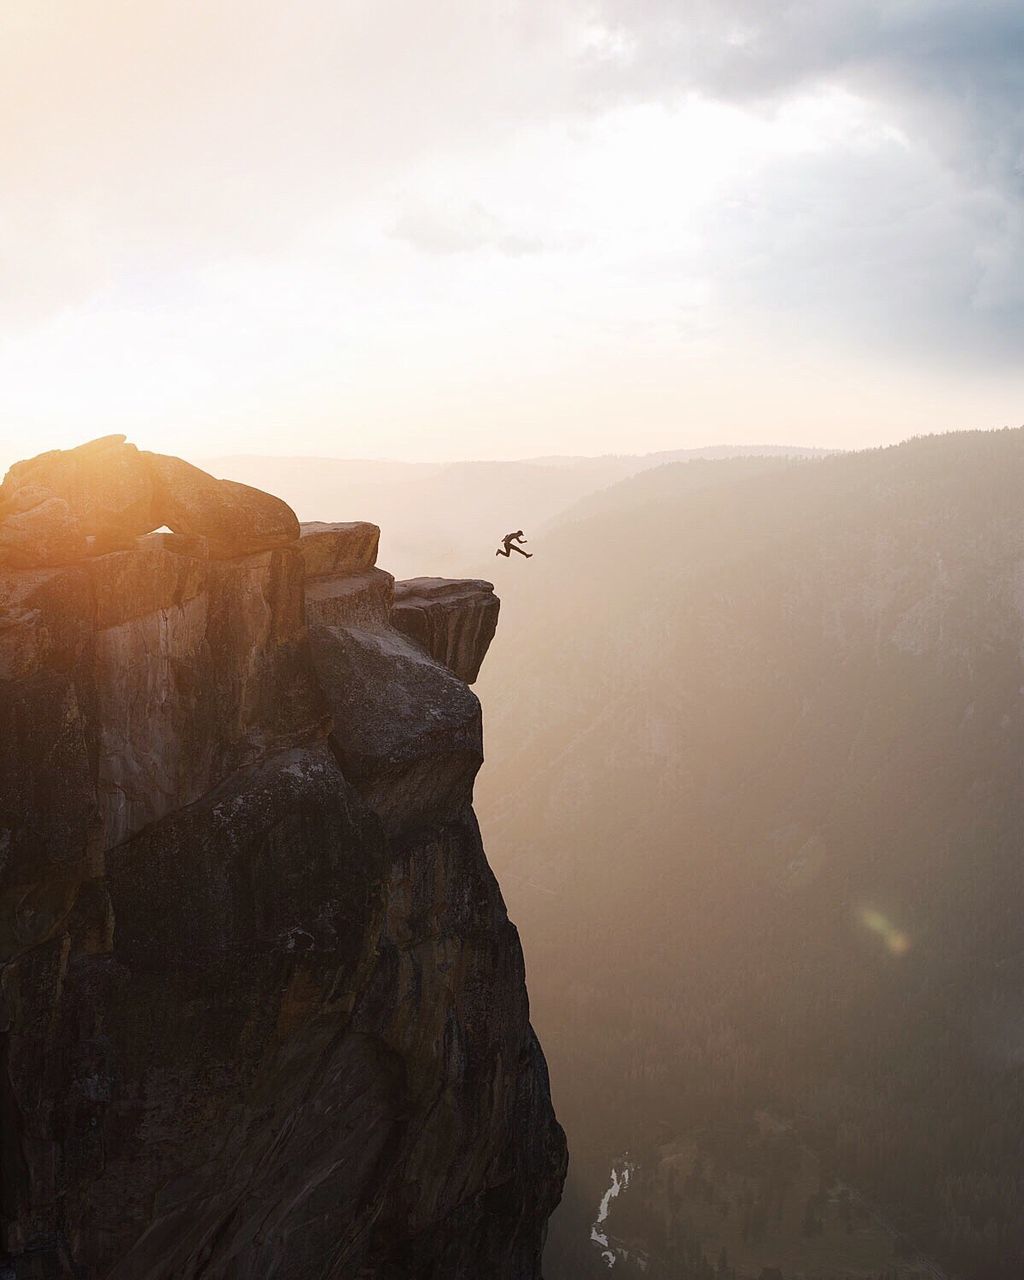 Distant man jumping from the top of a mountain